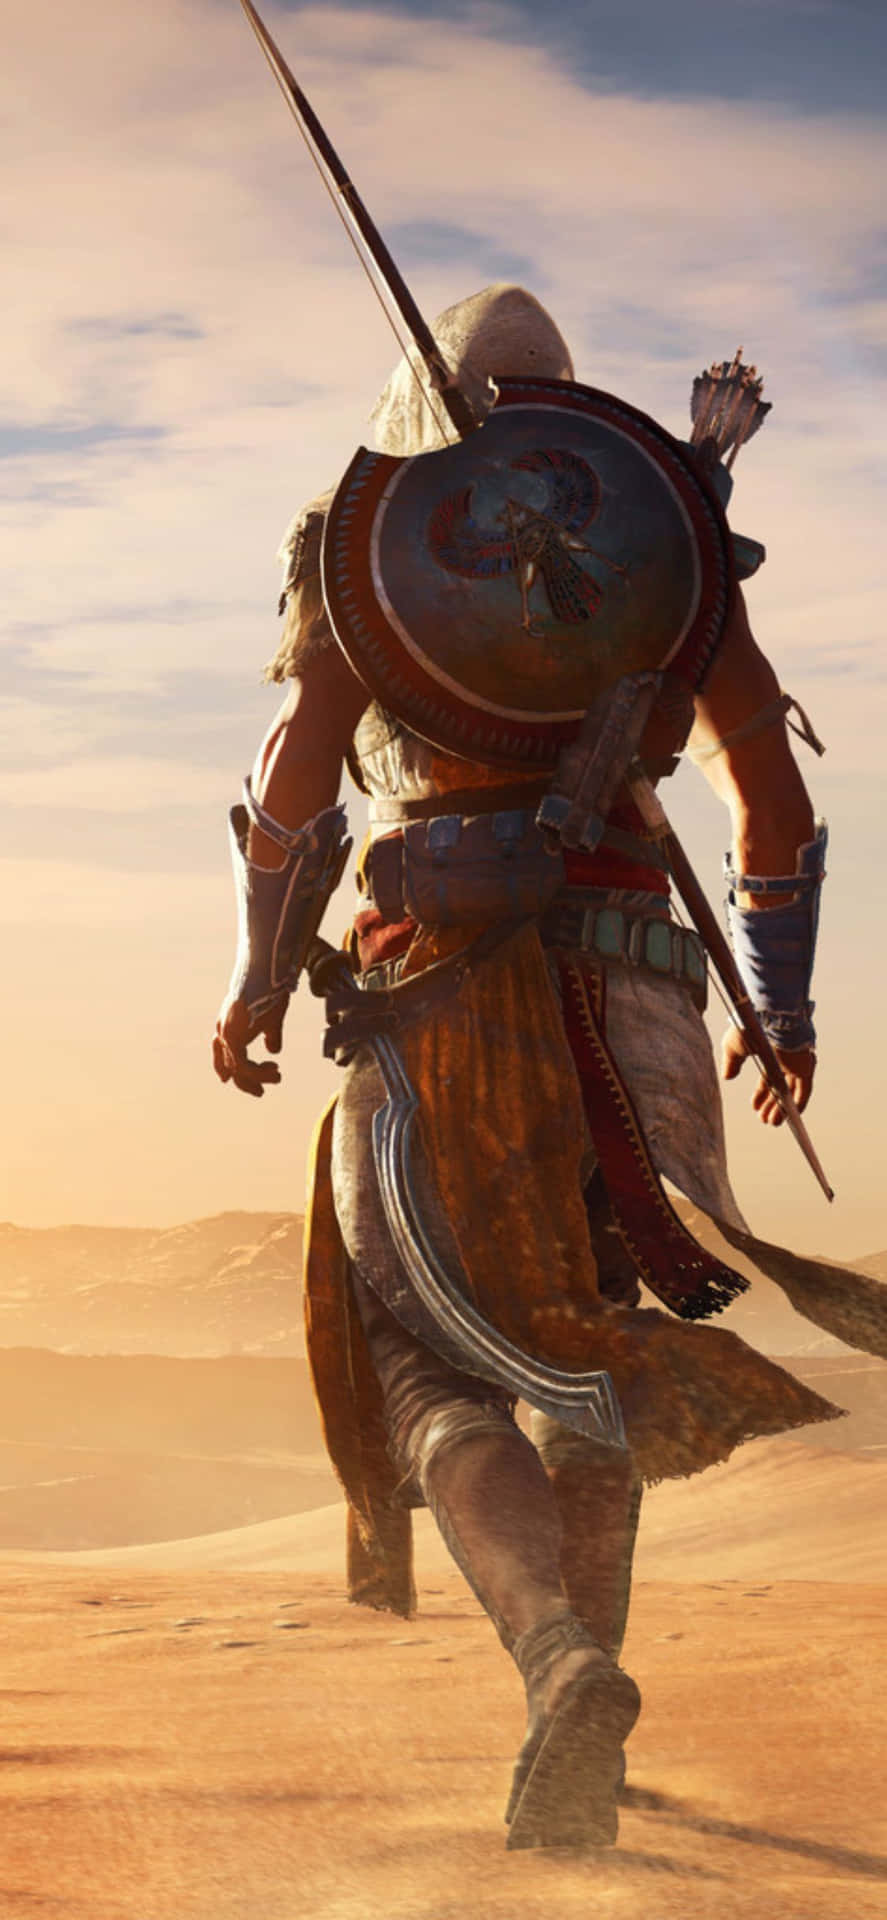 Climb The Great Pyramids In Iphone X’s Assassin's Creed Origins!